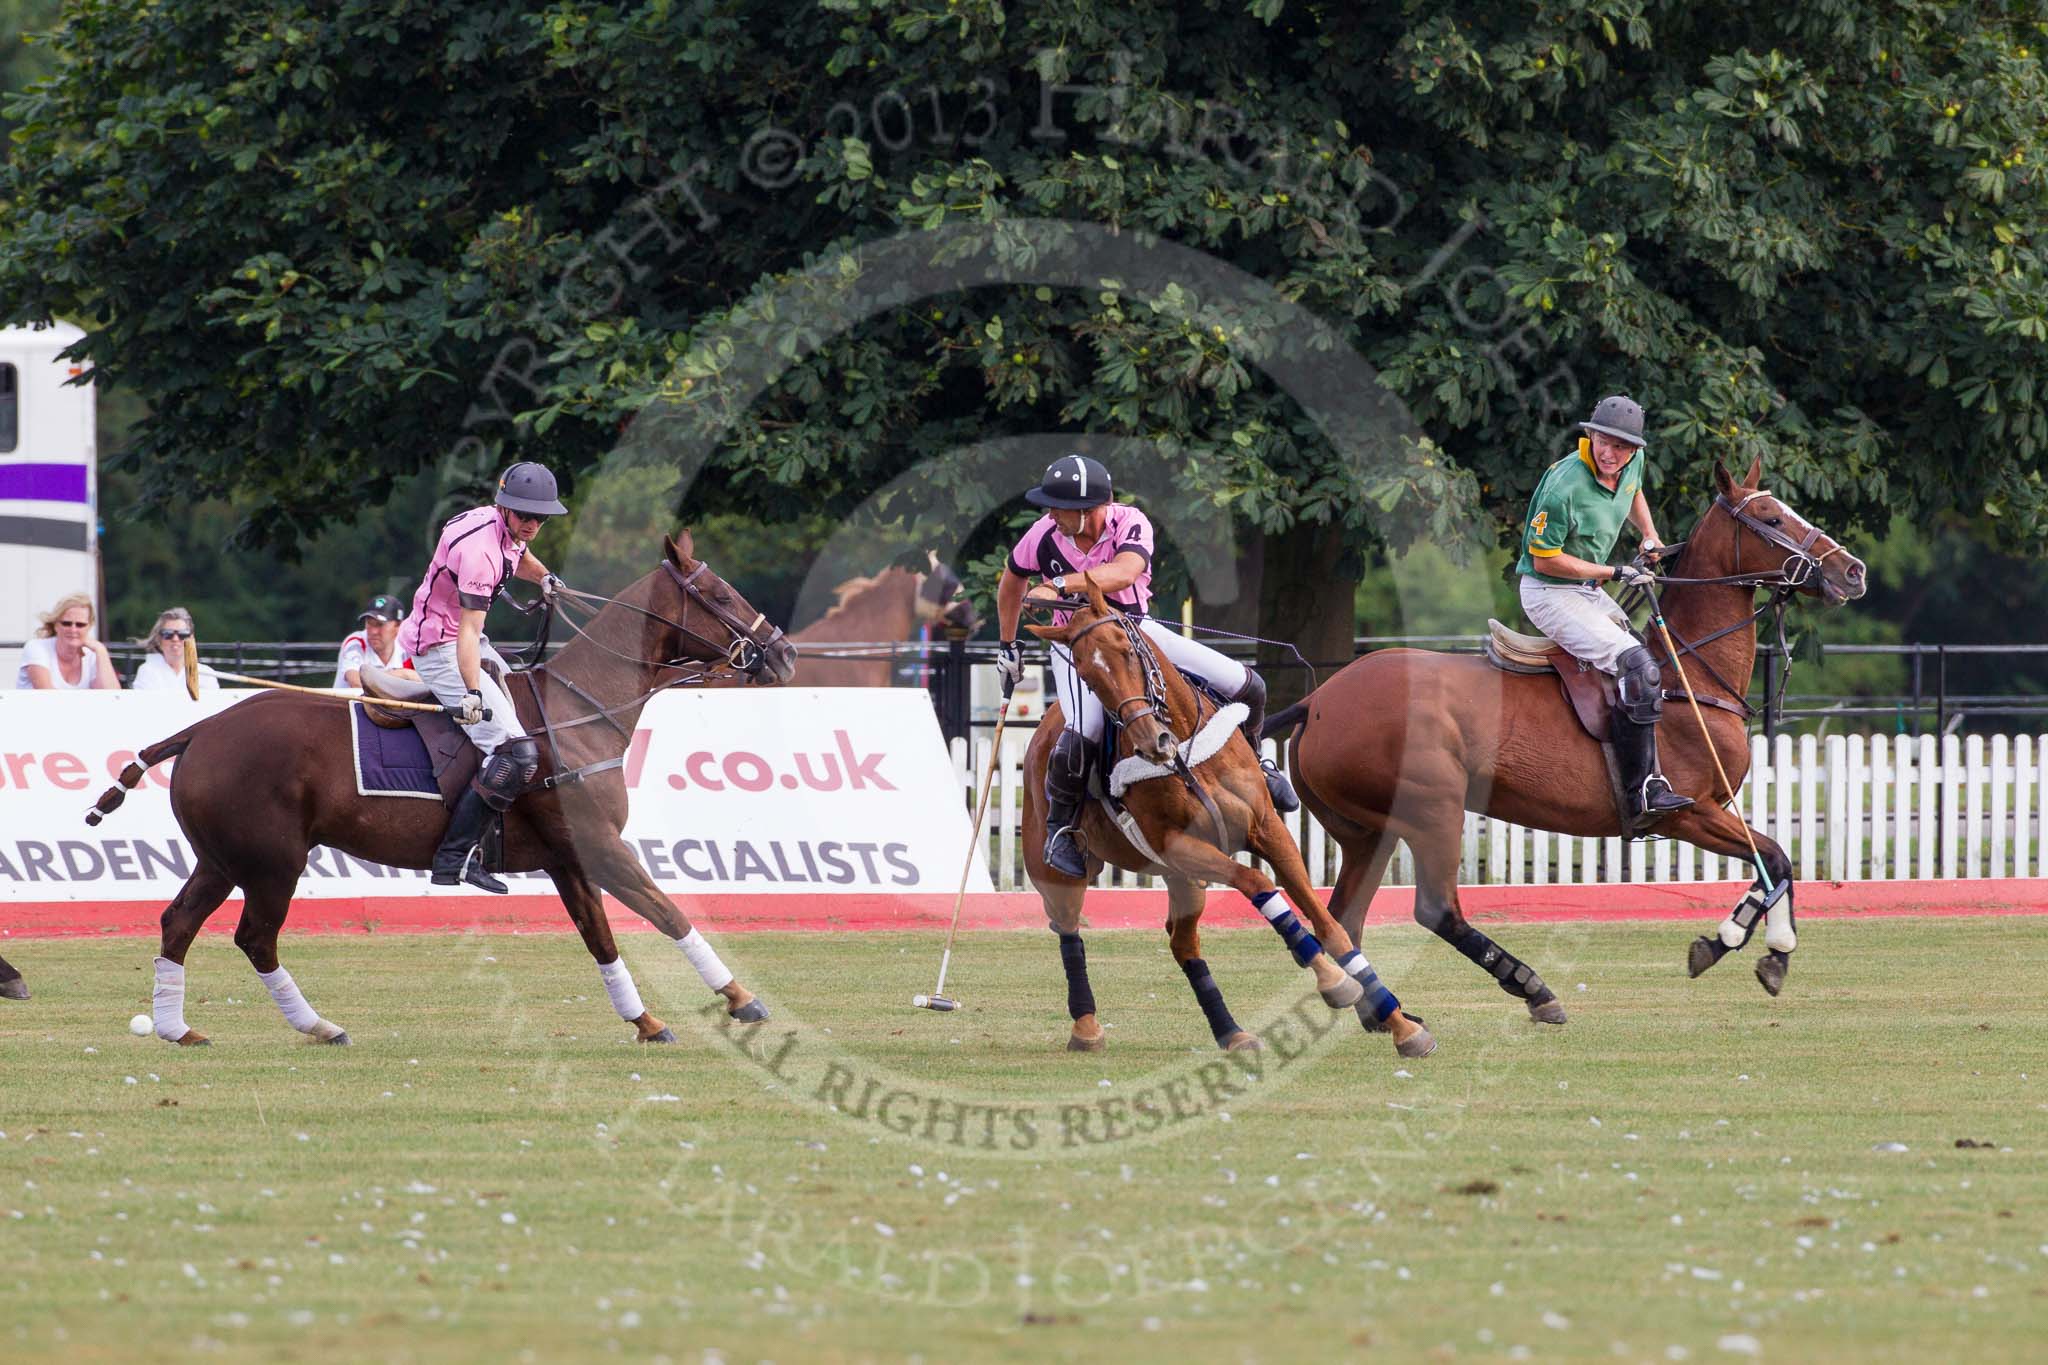 DBPC Polo in the Park 2013, Final of the Tusk Trophy (4 Goals), Rutland vs C.A.N.I..
Dallas Burston Polo Club, ,
Southam,
Warwickshire,
United Kingdom,
on 01 September 2013 at 17:08, image #638